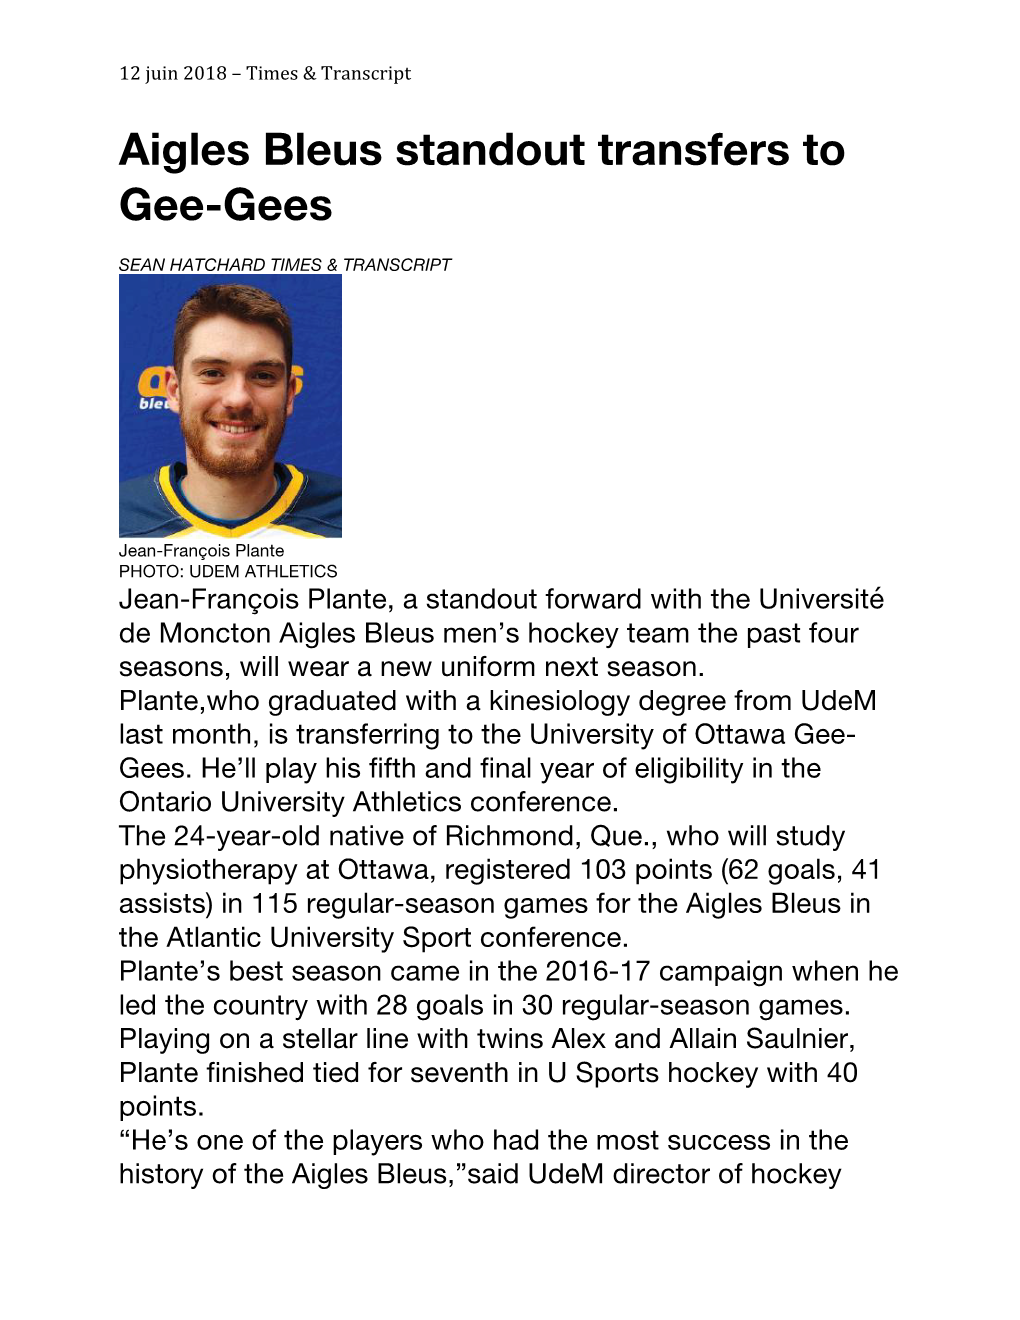 Aigles Bleus Standout Transfers to Gee-Gees